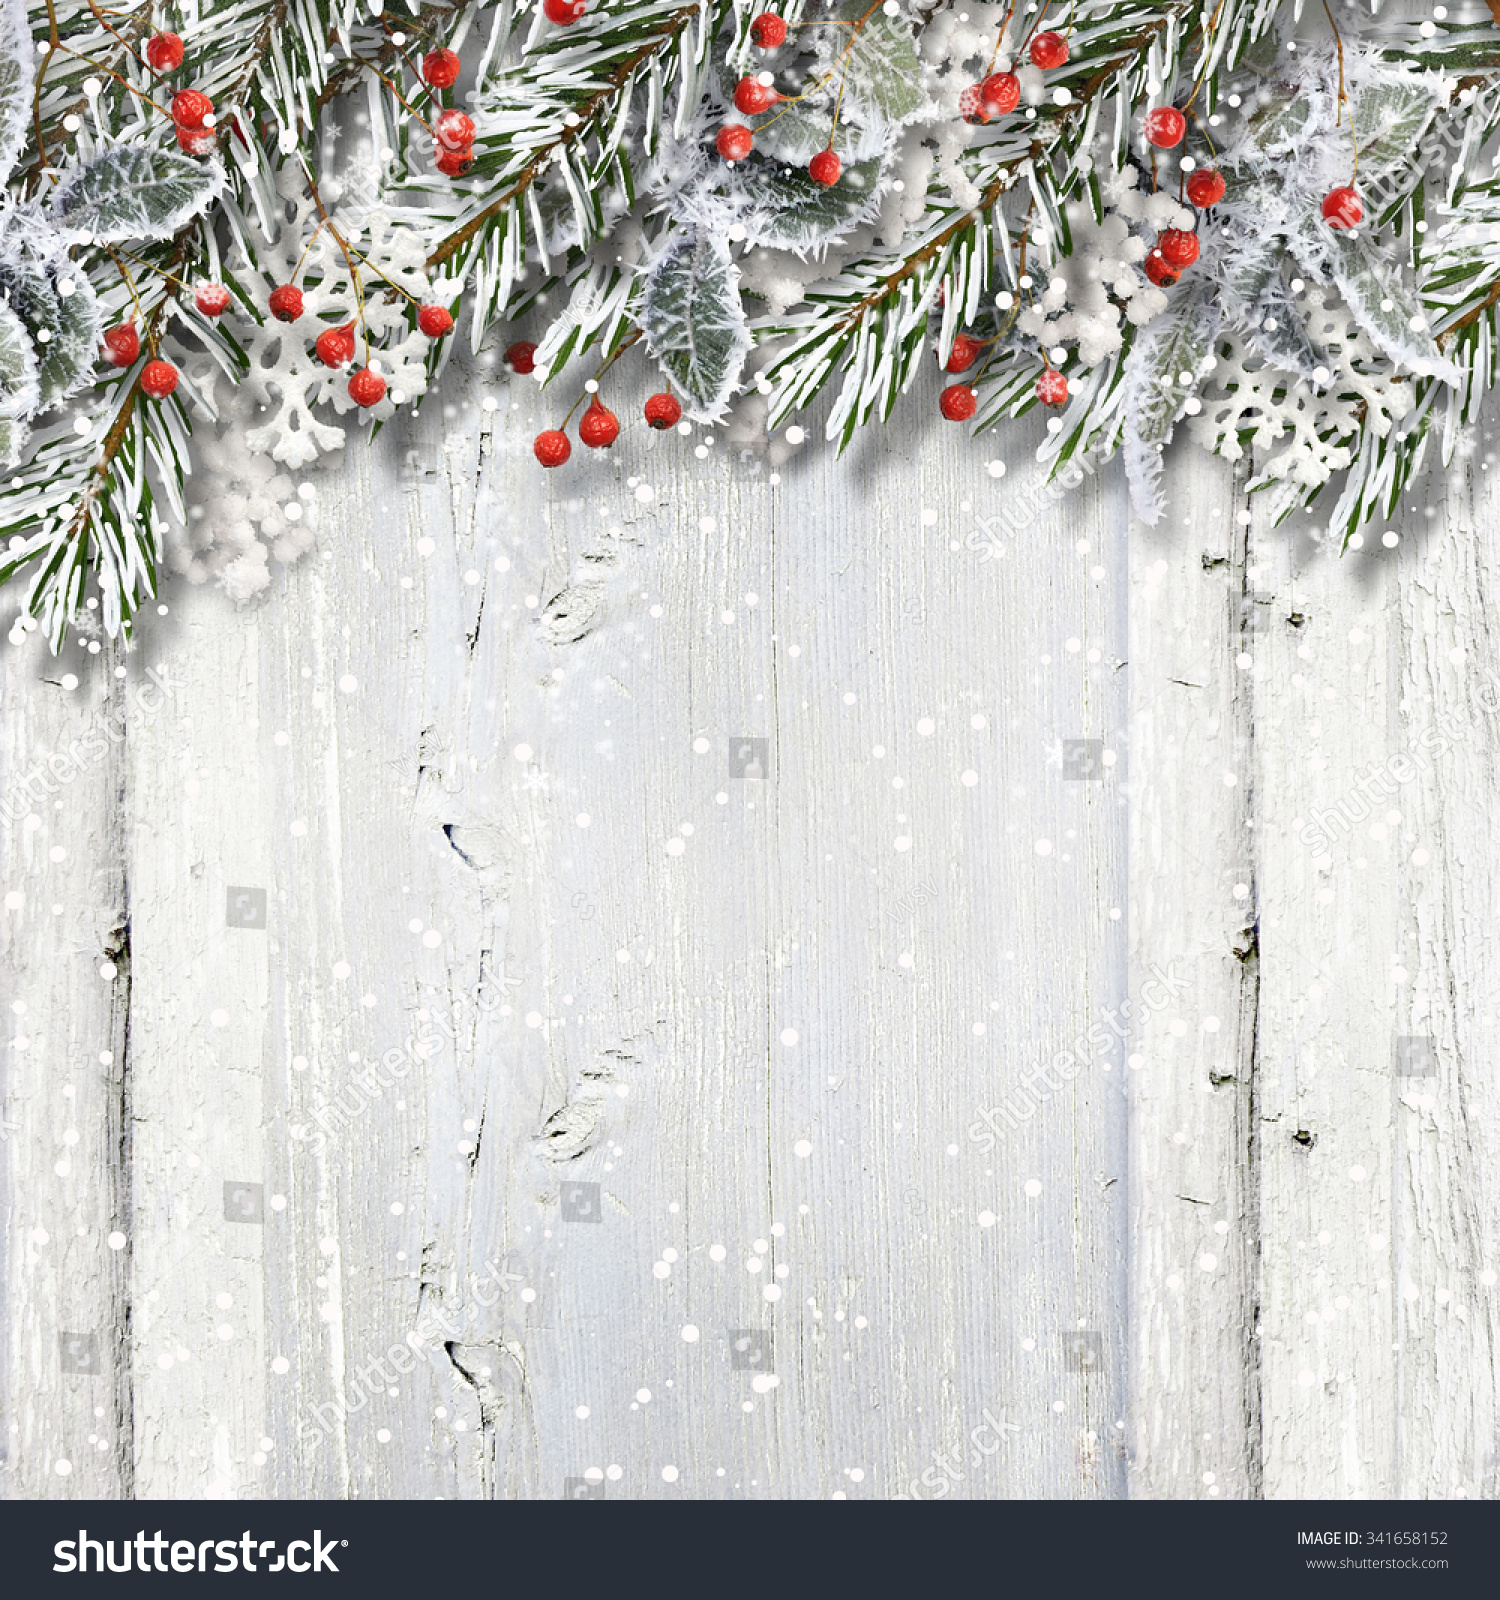 Christmas wooden background with fir branches and holly #341658152